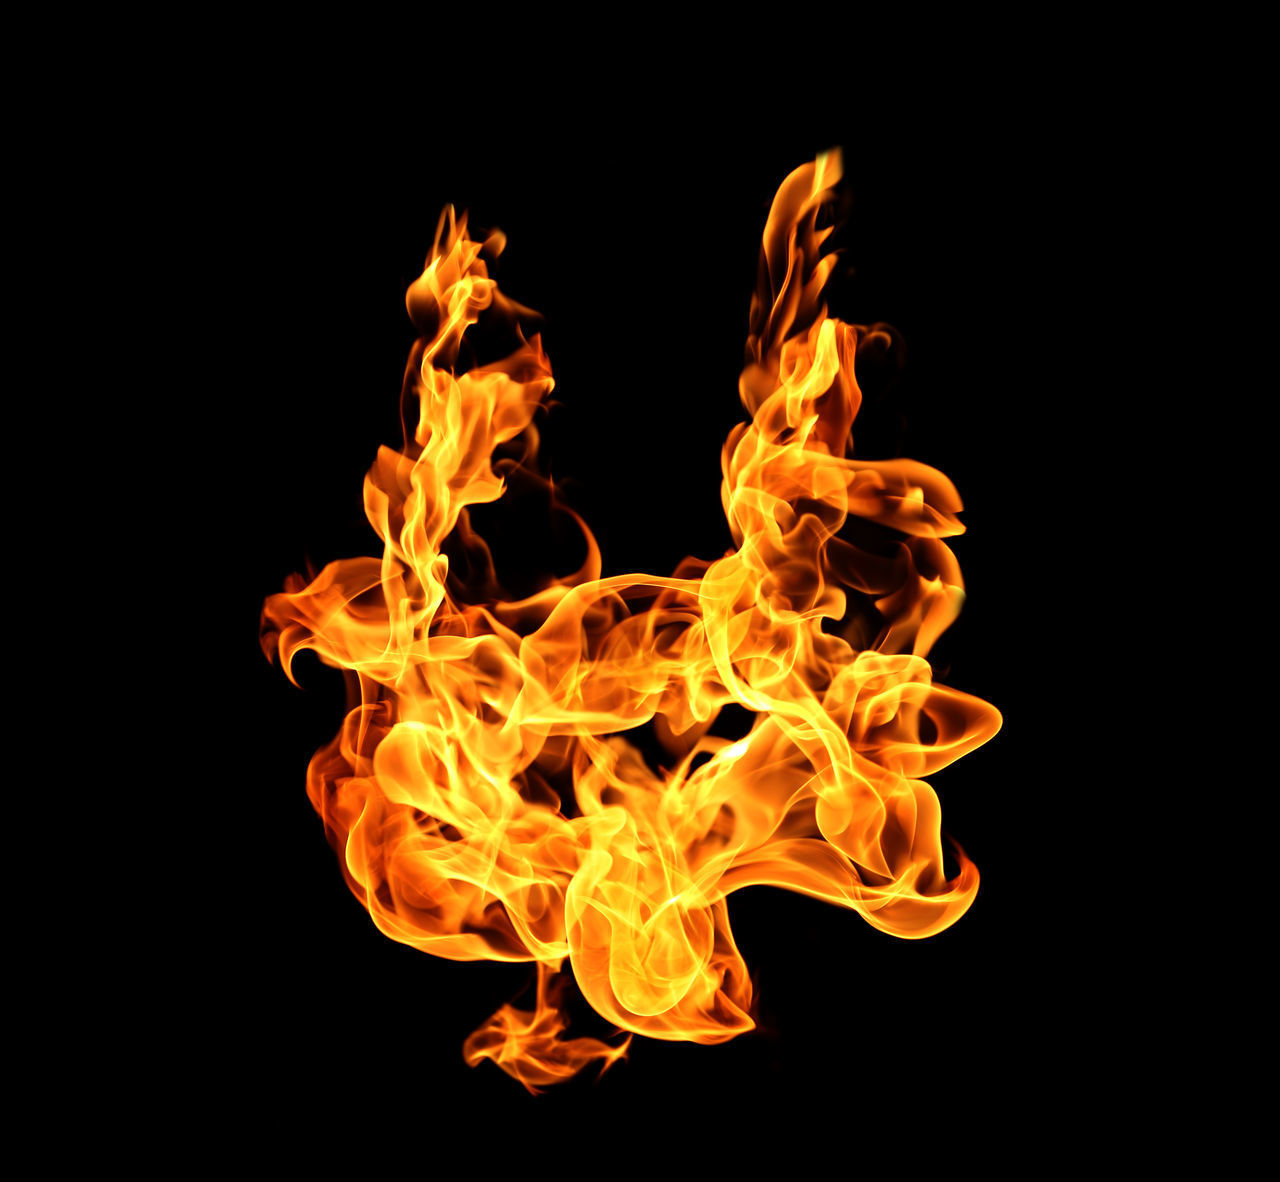 CLOSE-UP OF YELLOW FIRE AGAINST BLACK BACKGROUND